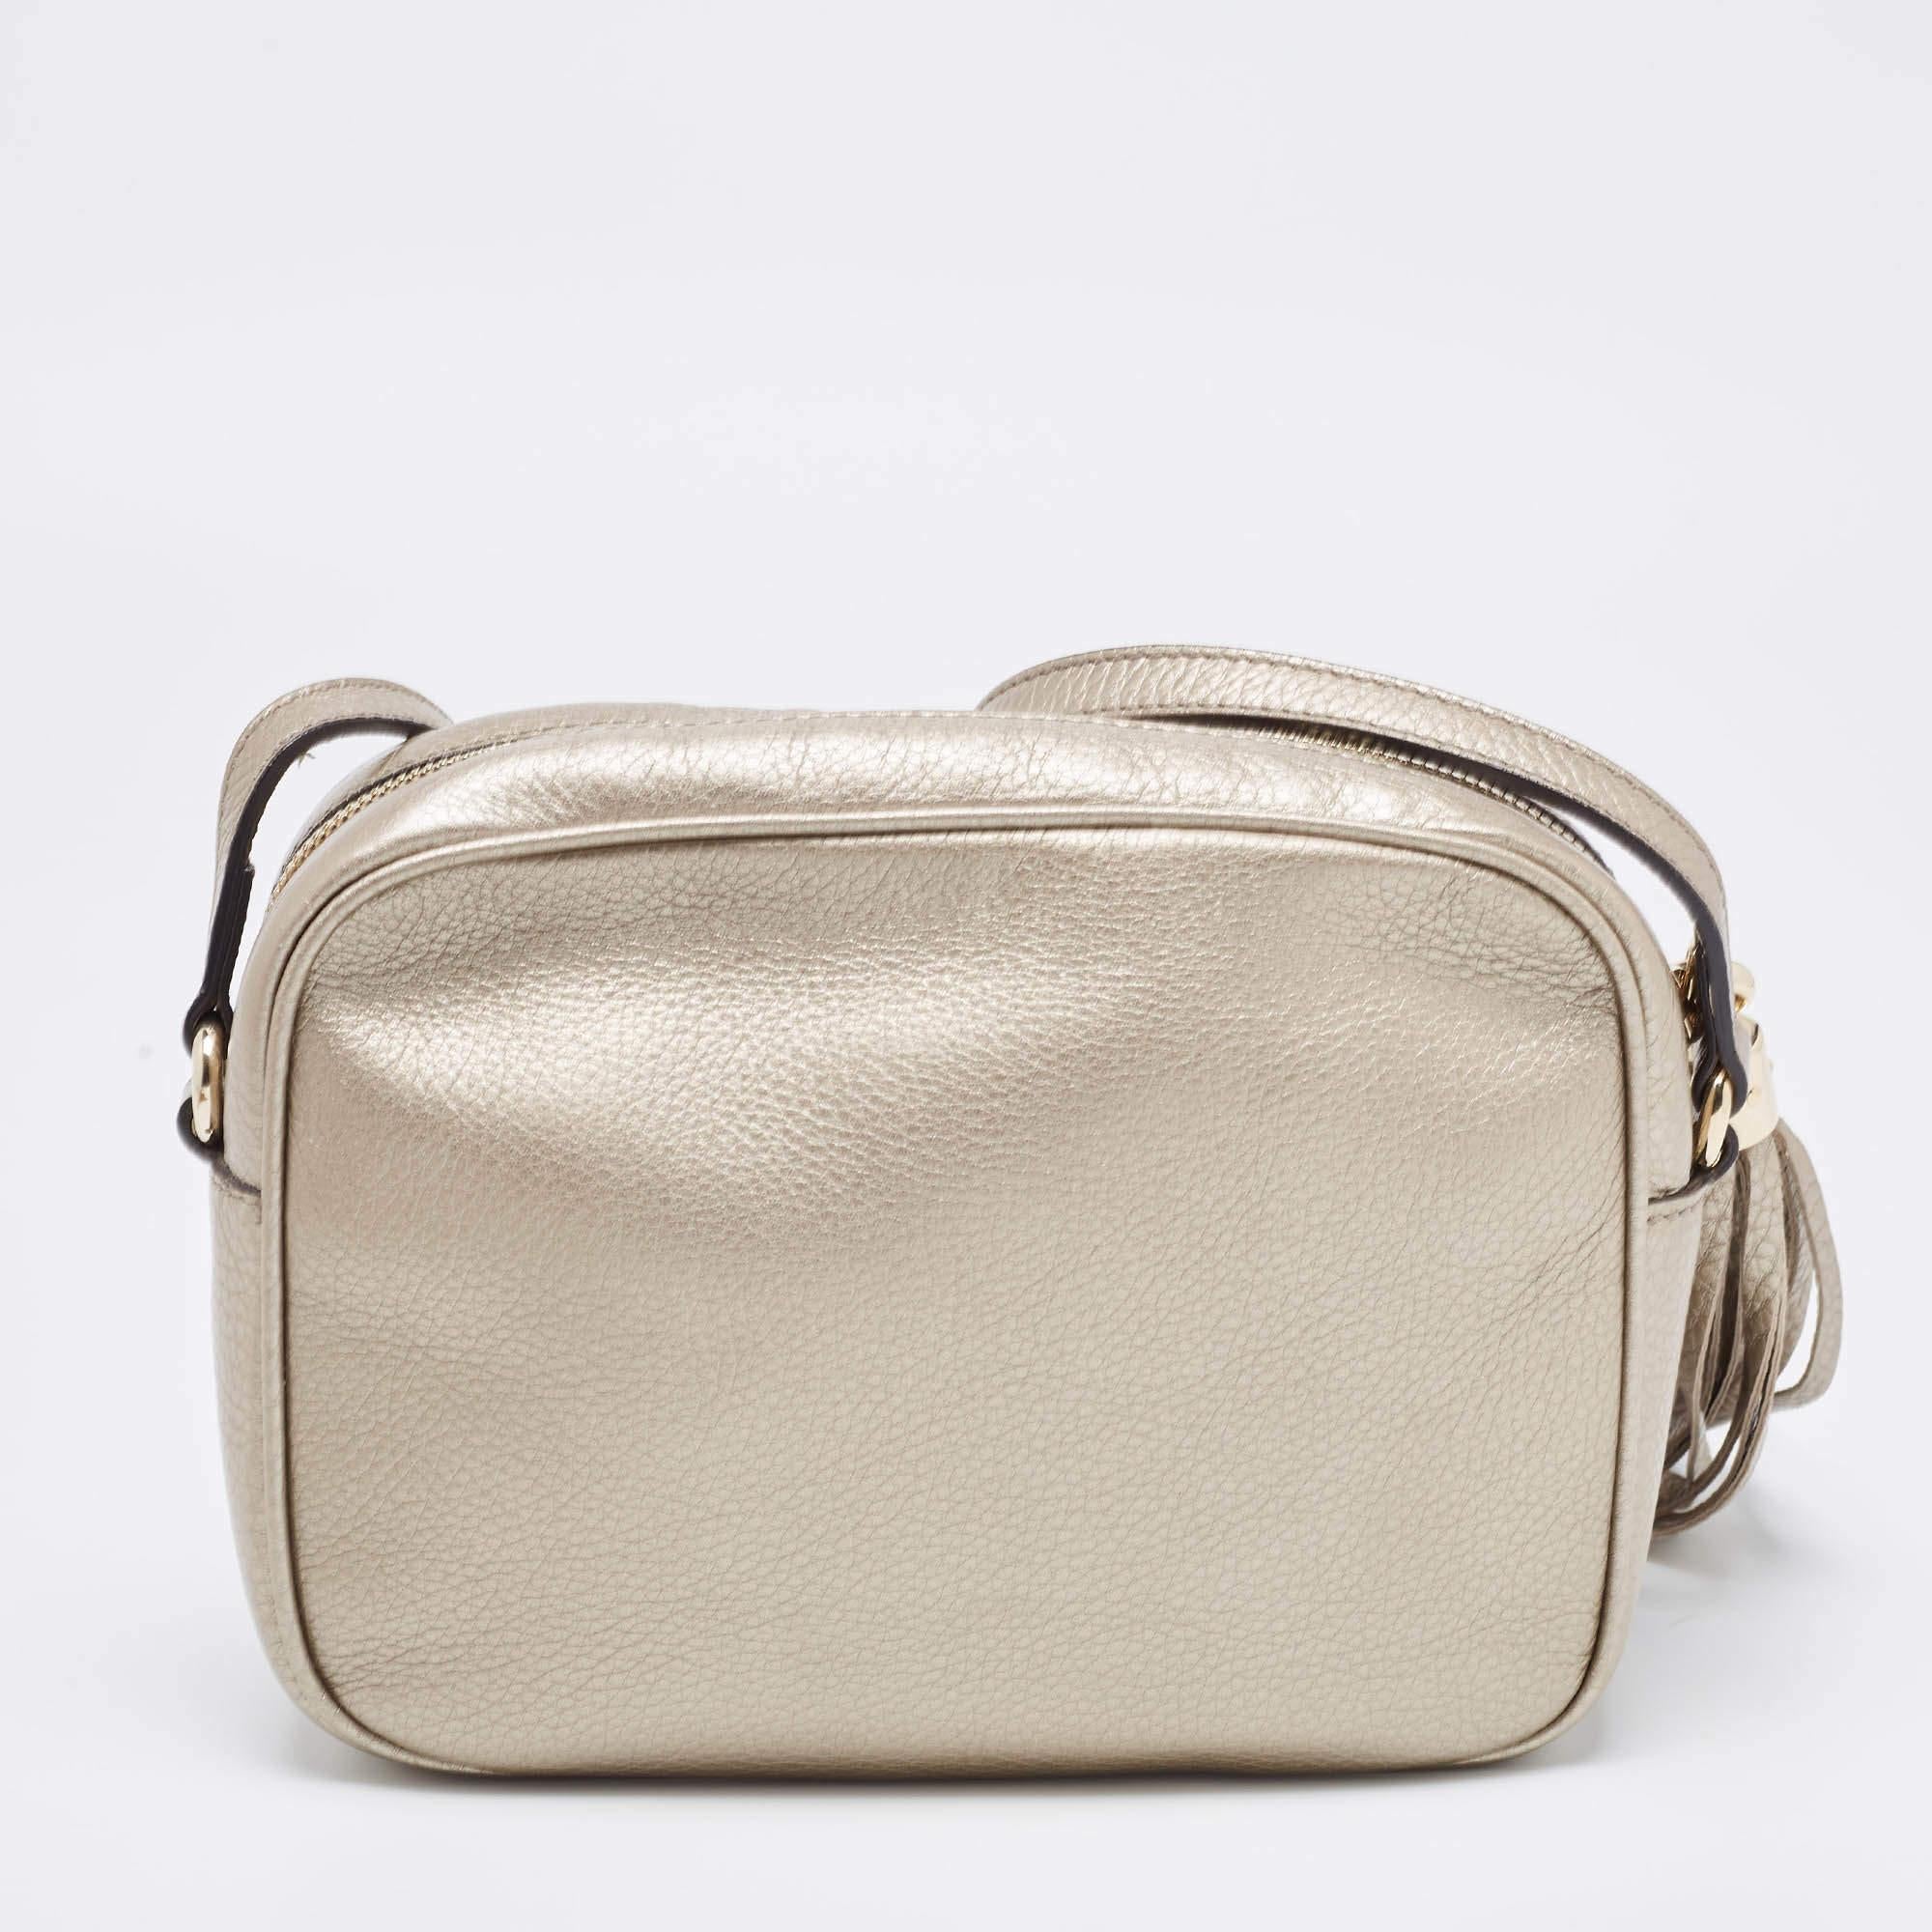 Express your personal style with this high-end crossbody bag. Crafted from quality materials, it has been added with fine details and is finished perfectly. It features a well-sized interior.

Includes: Original Dustbag

